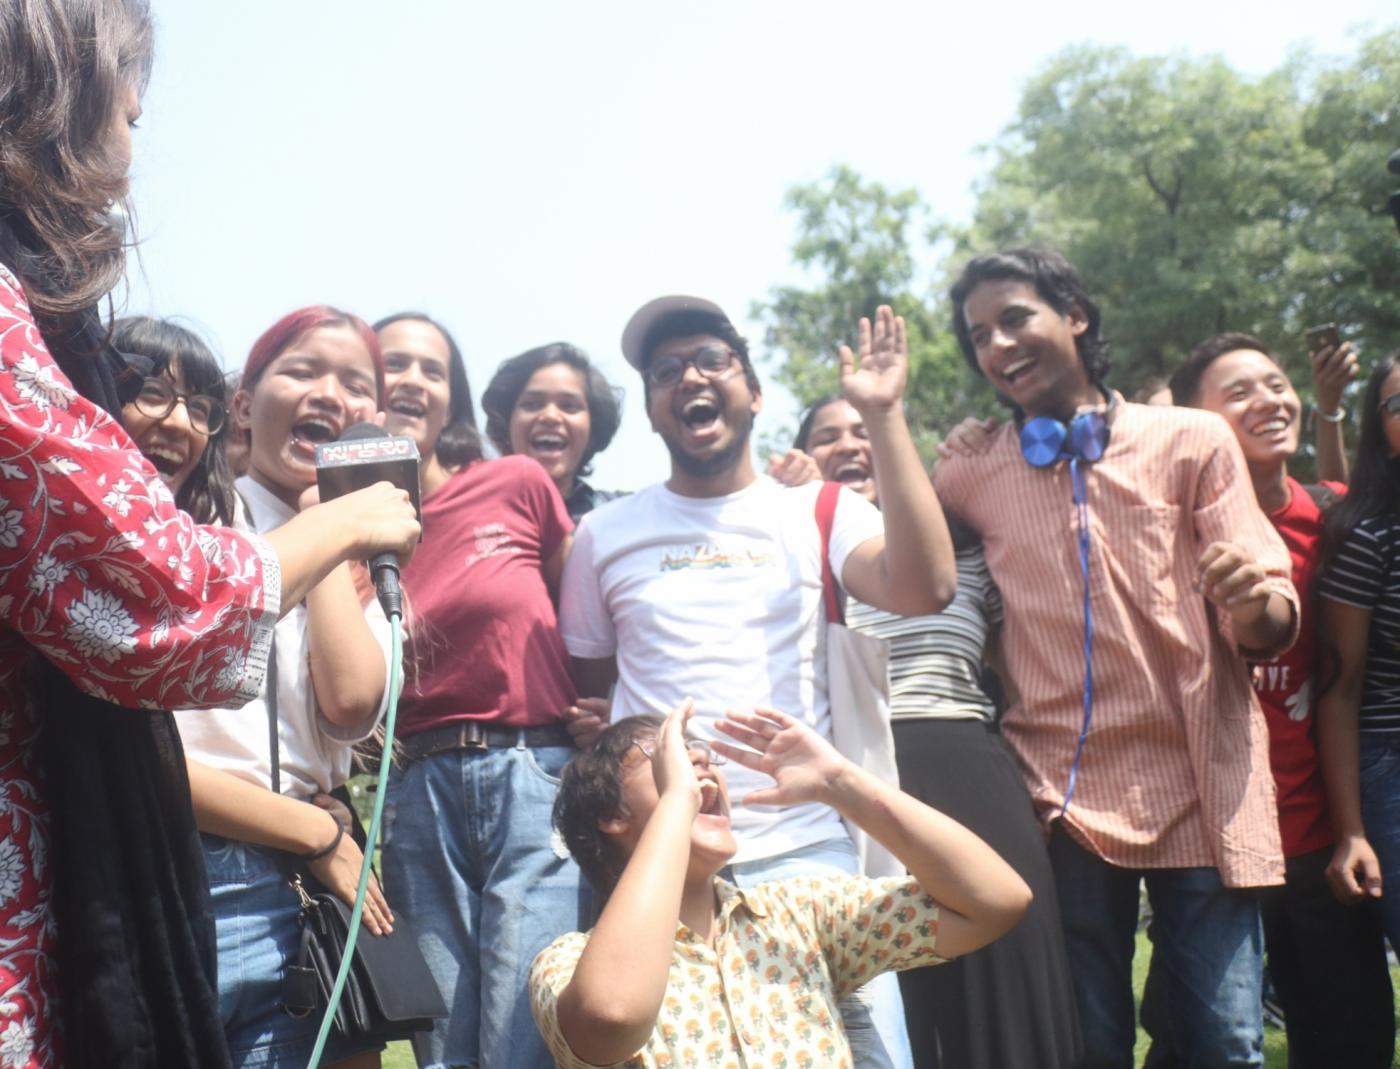 New Delhi: LGBTIQ (lesbian, gay, bisexual, transgender/transsexual, intersex and queer/questioning) supporters celebrate after the Supreme Court in a landmark decision decriminalised homosexuality by declaring Section 377, the penal provision which criminalised gay sex, as "manifestly arbitrary"; in New Delhi on Sept 6, 2018. (Photo: IANS) by .